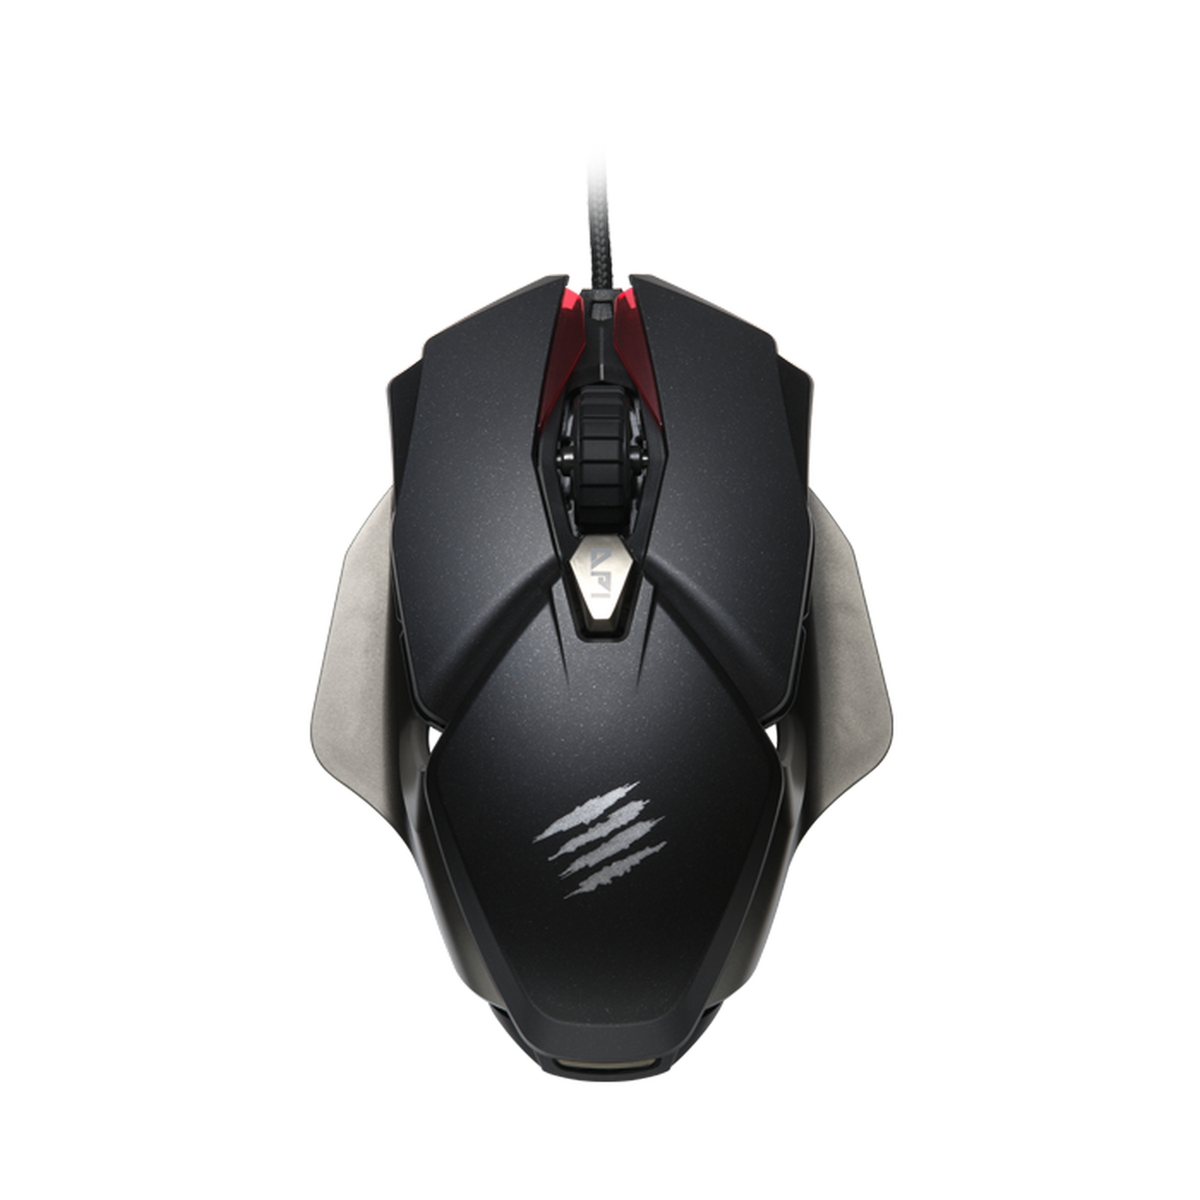 MAD CATZ B.A.T. 6+ Mouse, Black Gaming Ambidextreous Performance Schwarz Gaming Mouse